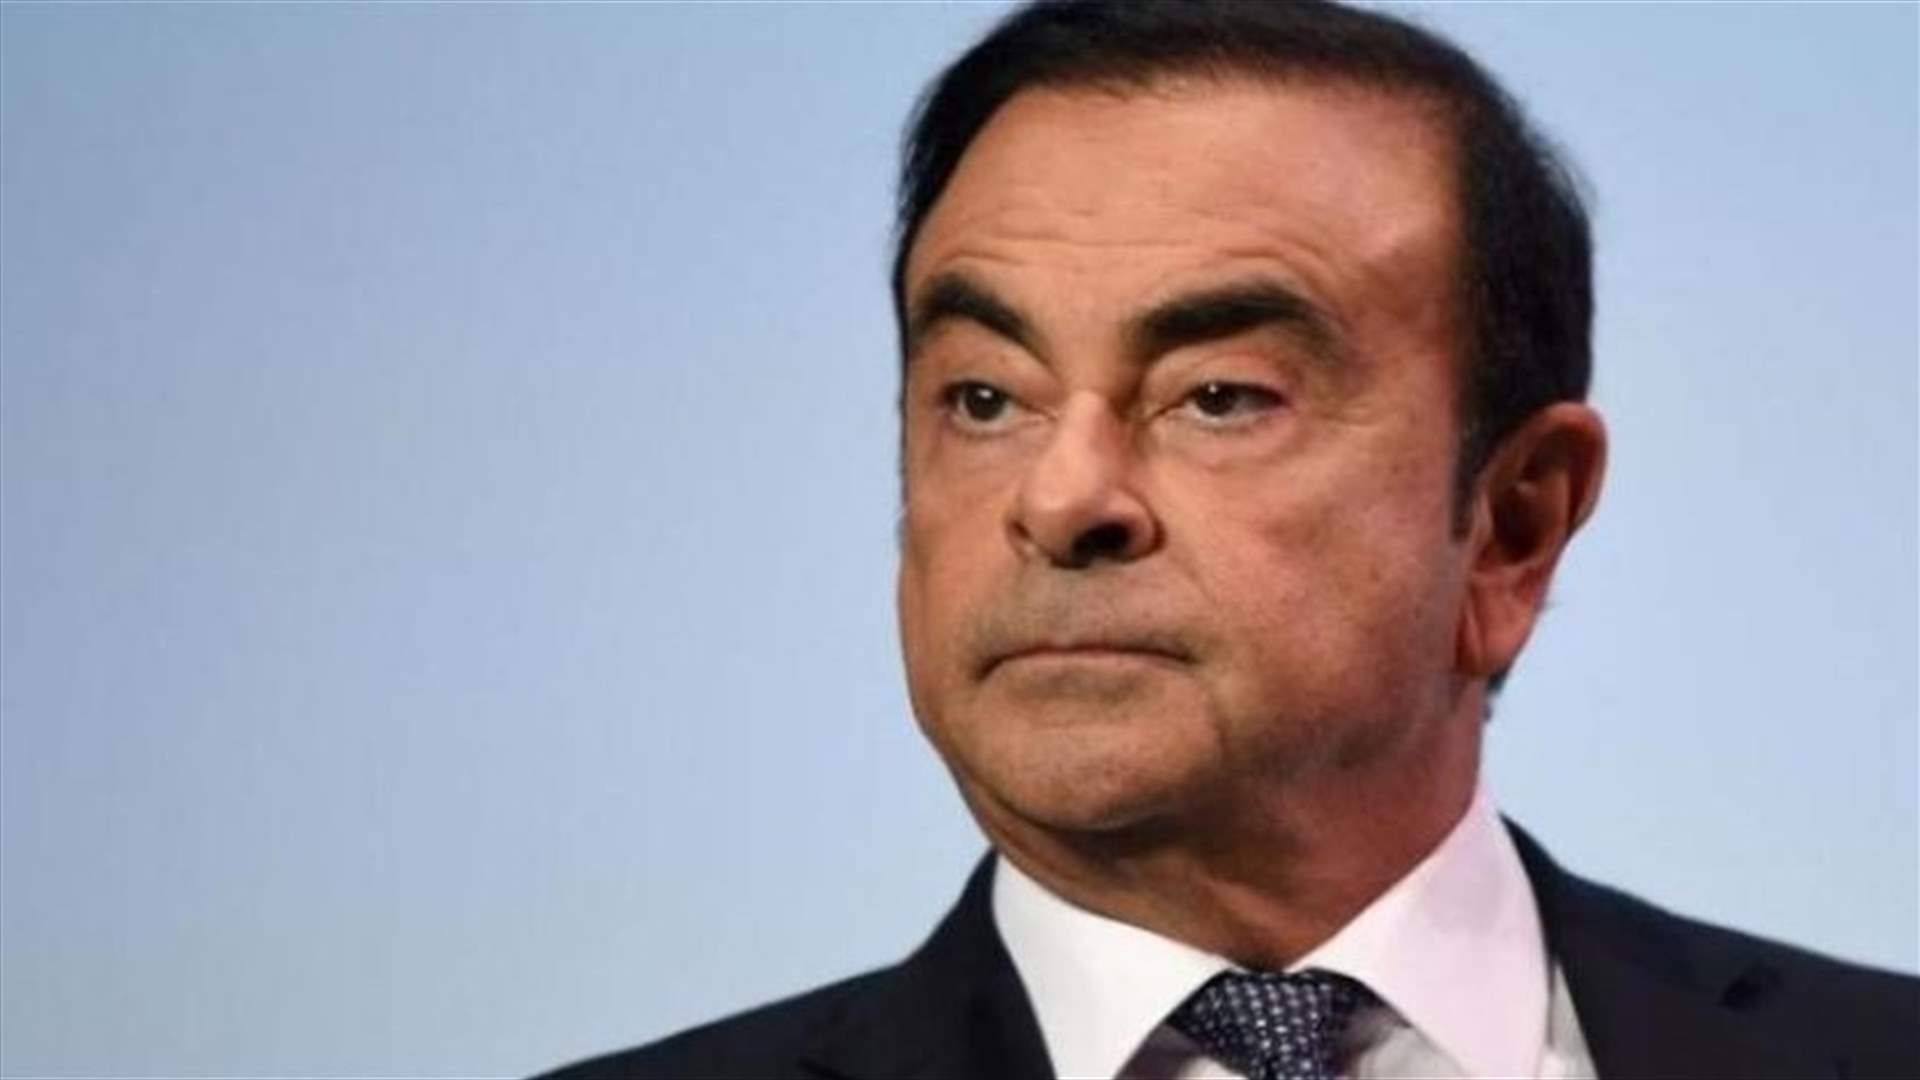 Japan in principle could press Lebanon to extradite ex-Nissan boss Ghosn -Japan minister